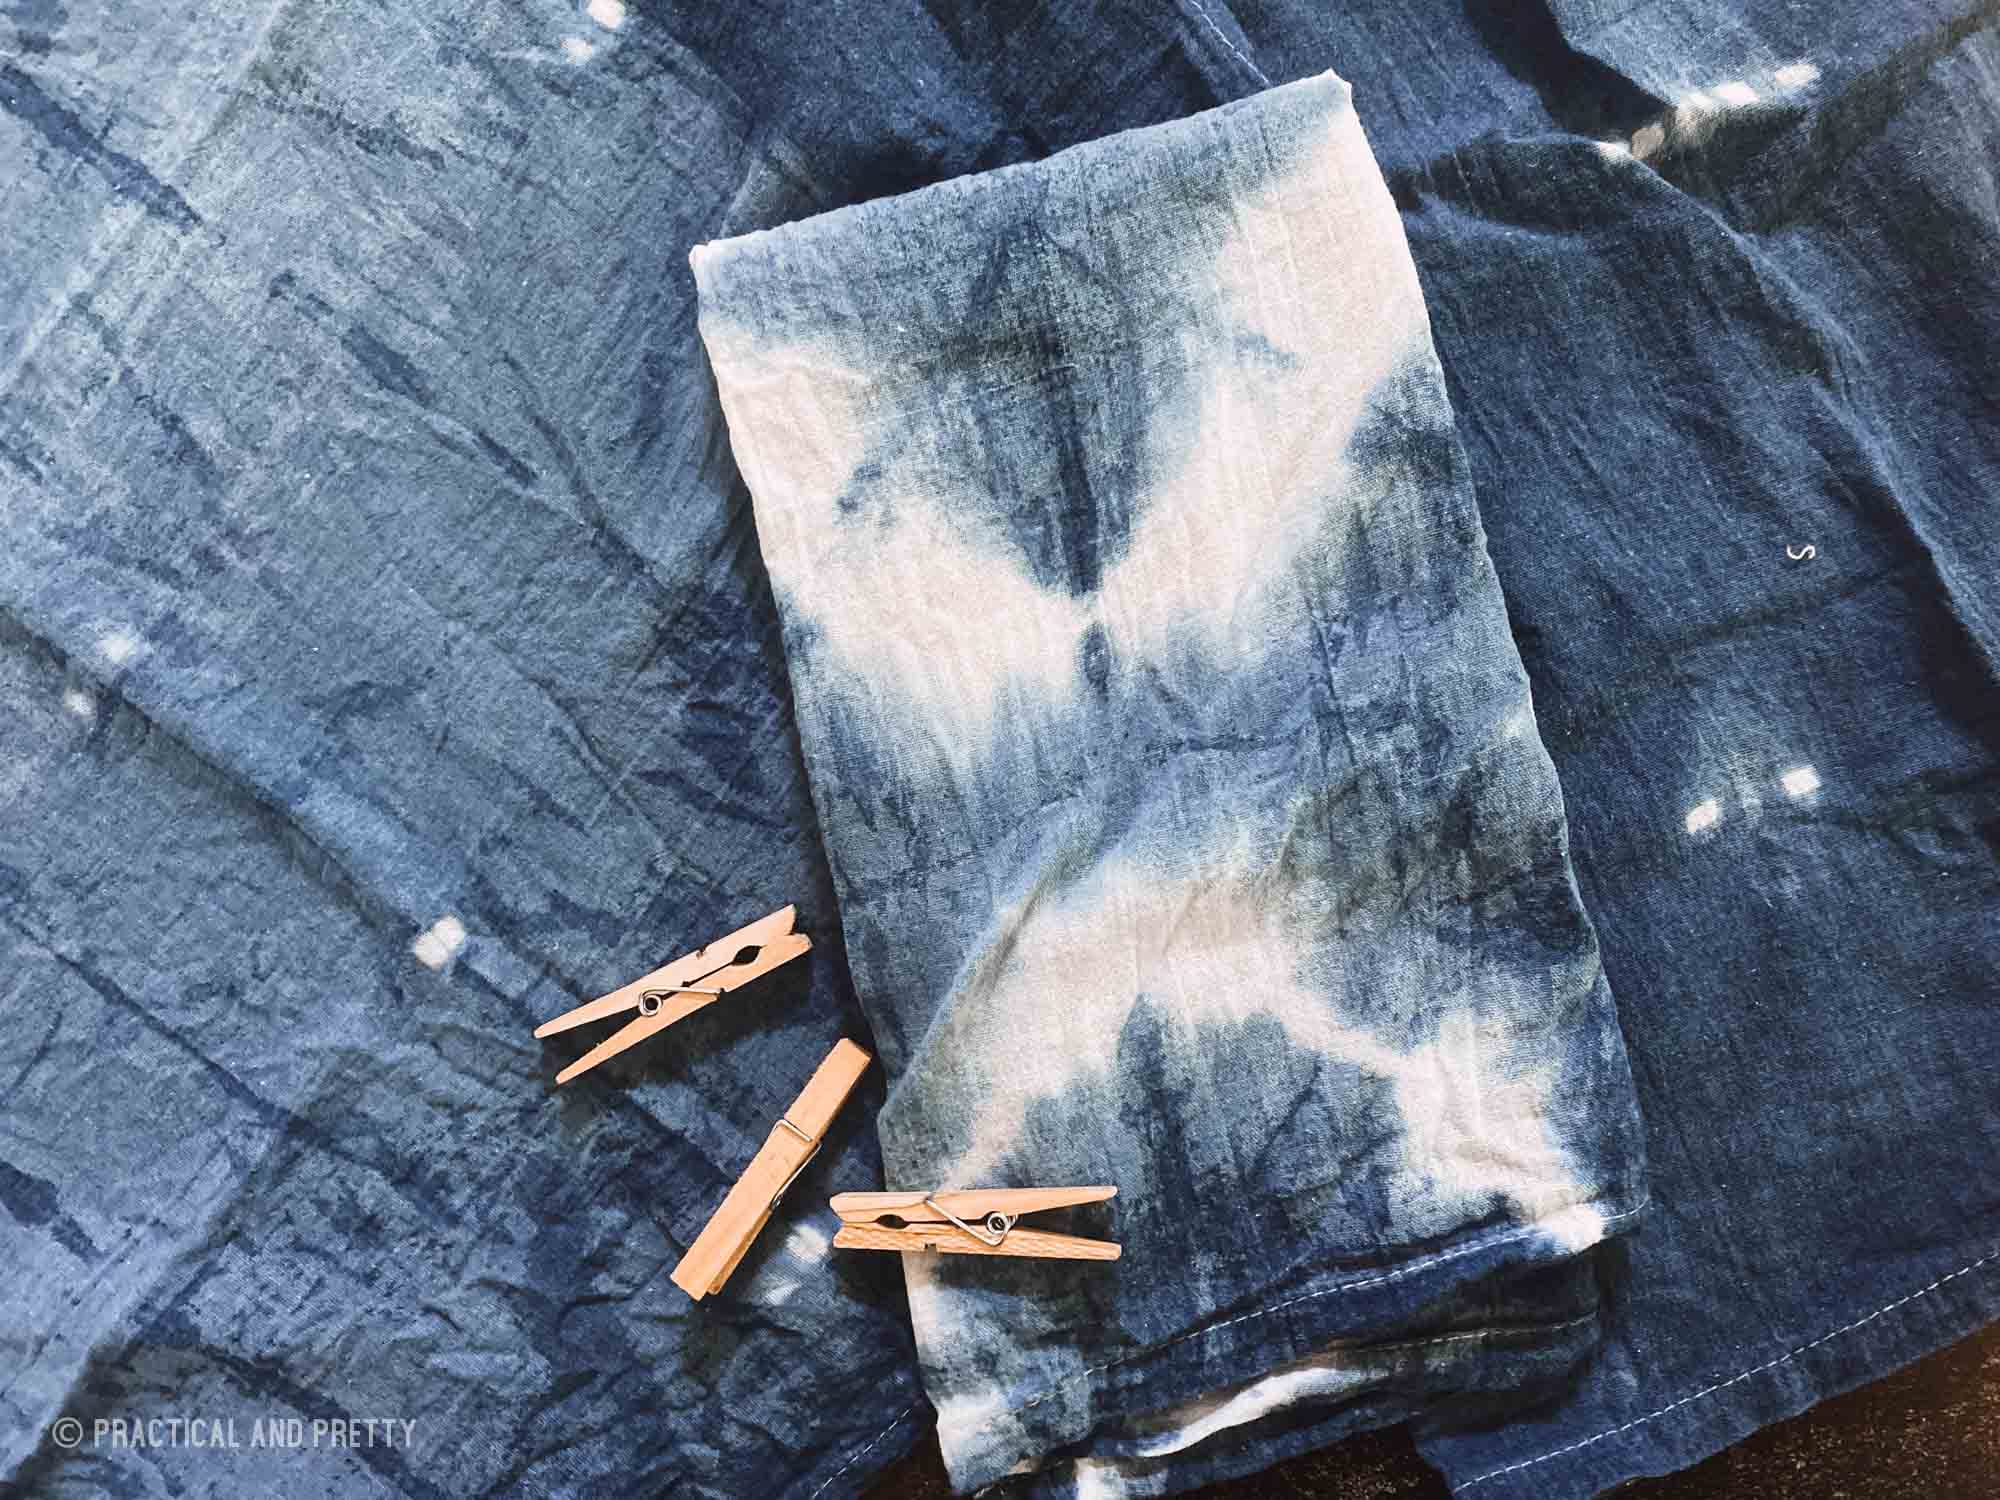 Shibori is a technique of folding fabrics using things including clothespins! This post I'll show you my favorite shibori patterns using clothespins.